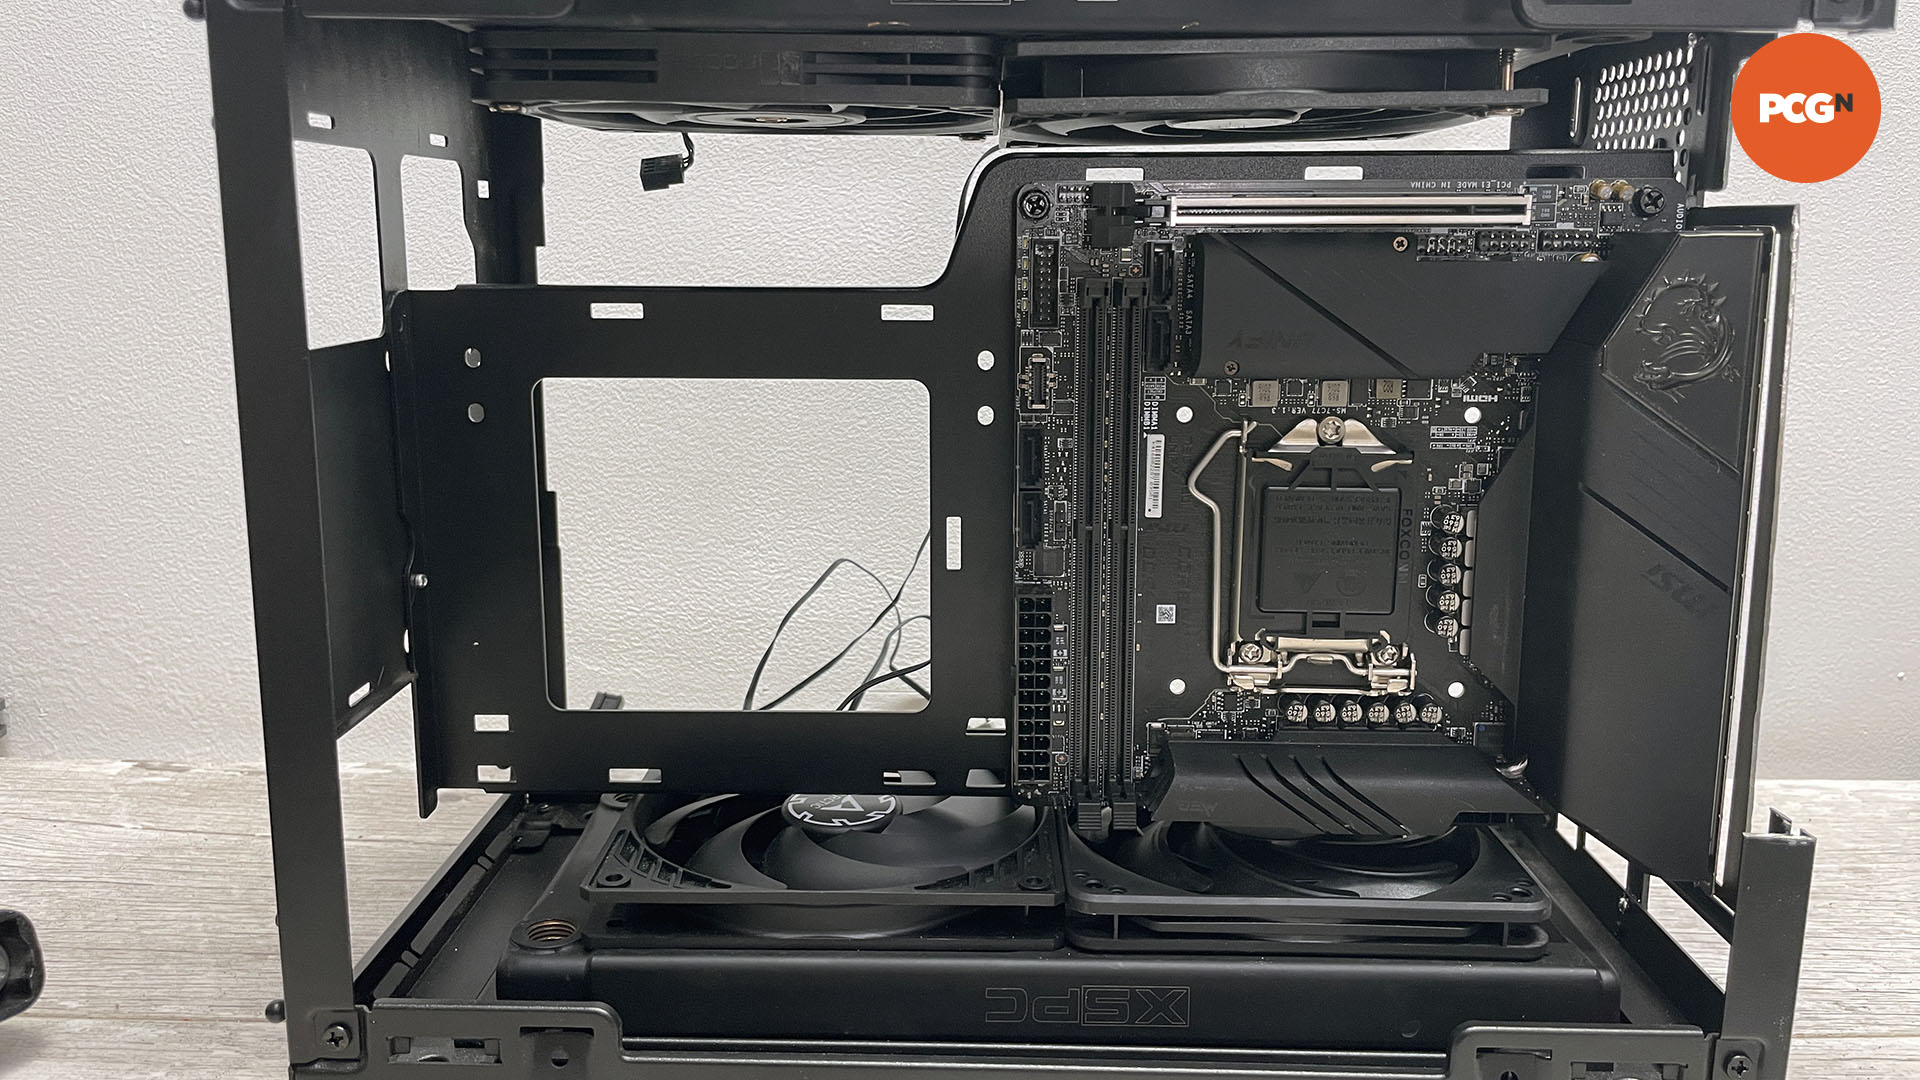 How to move the motherboard tray in your PC case: Install hardware